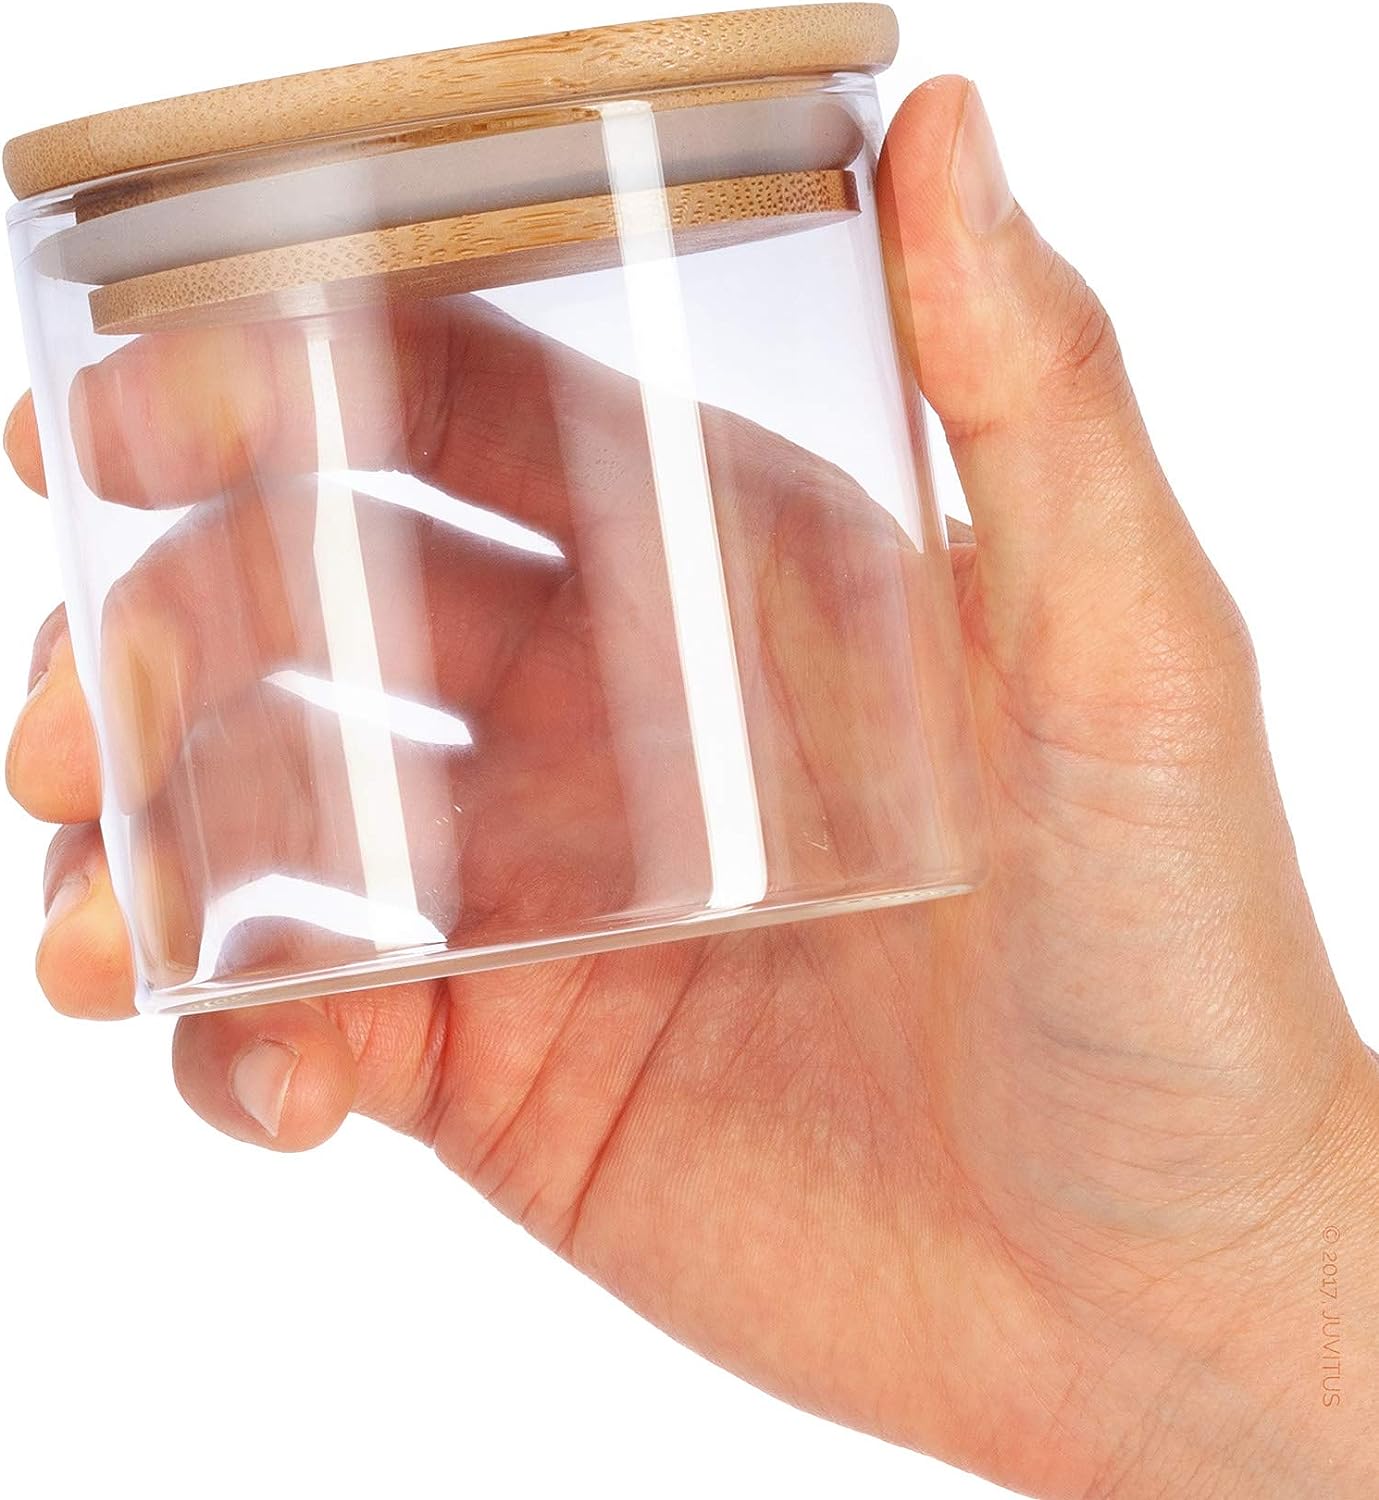 8 oz Clear Glass Borosilicate Jar with Bamboo Silicone Sealed Lid